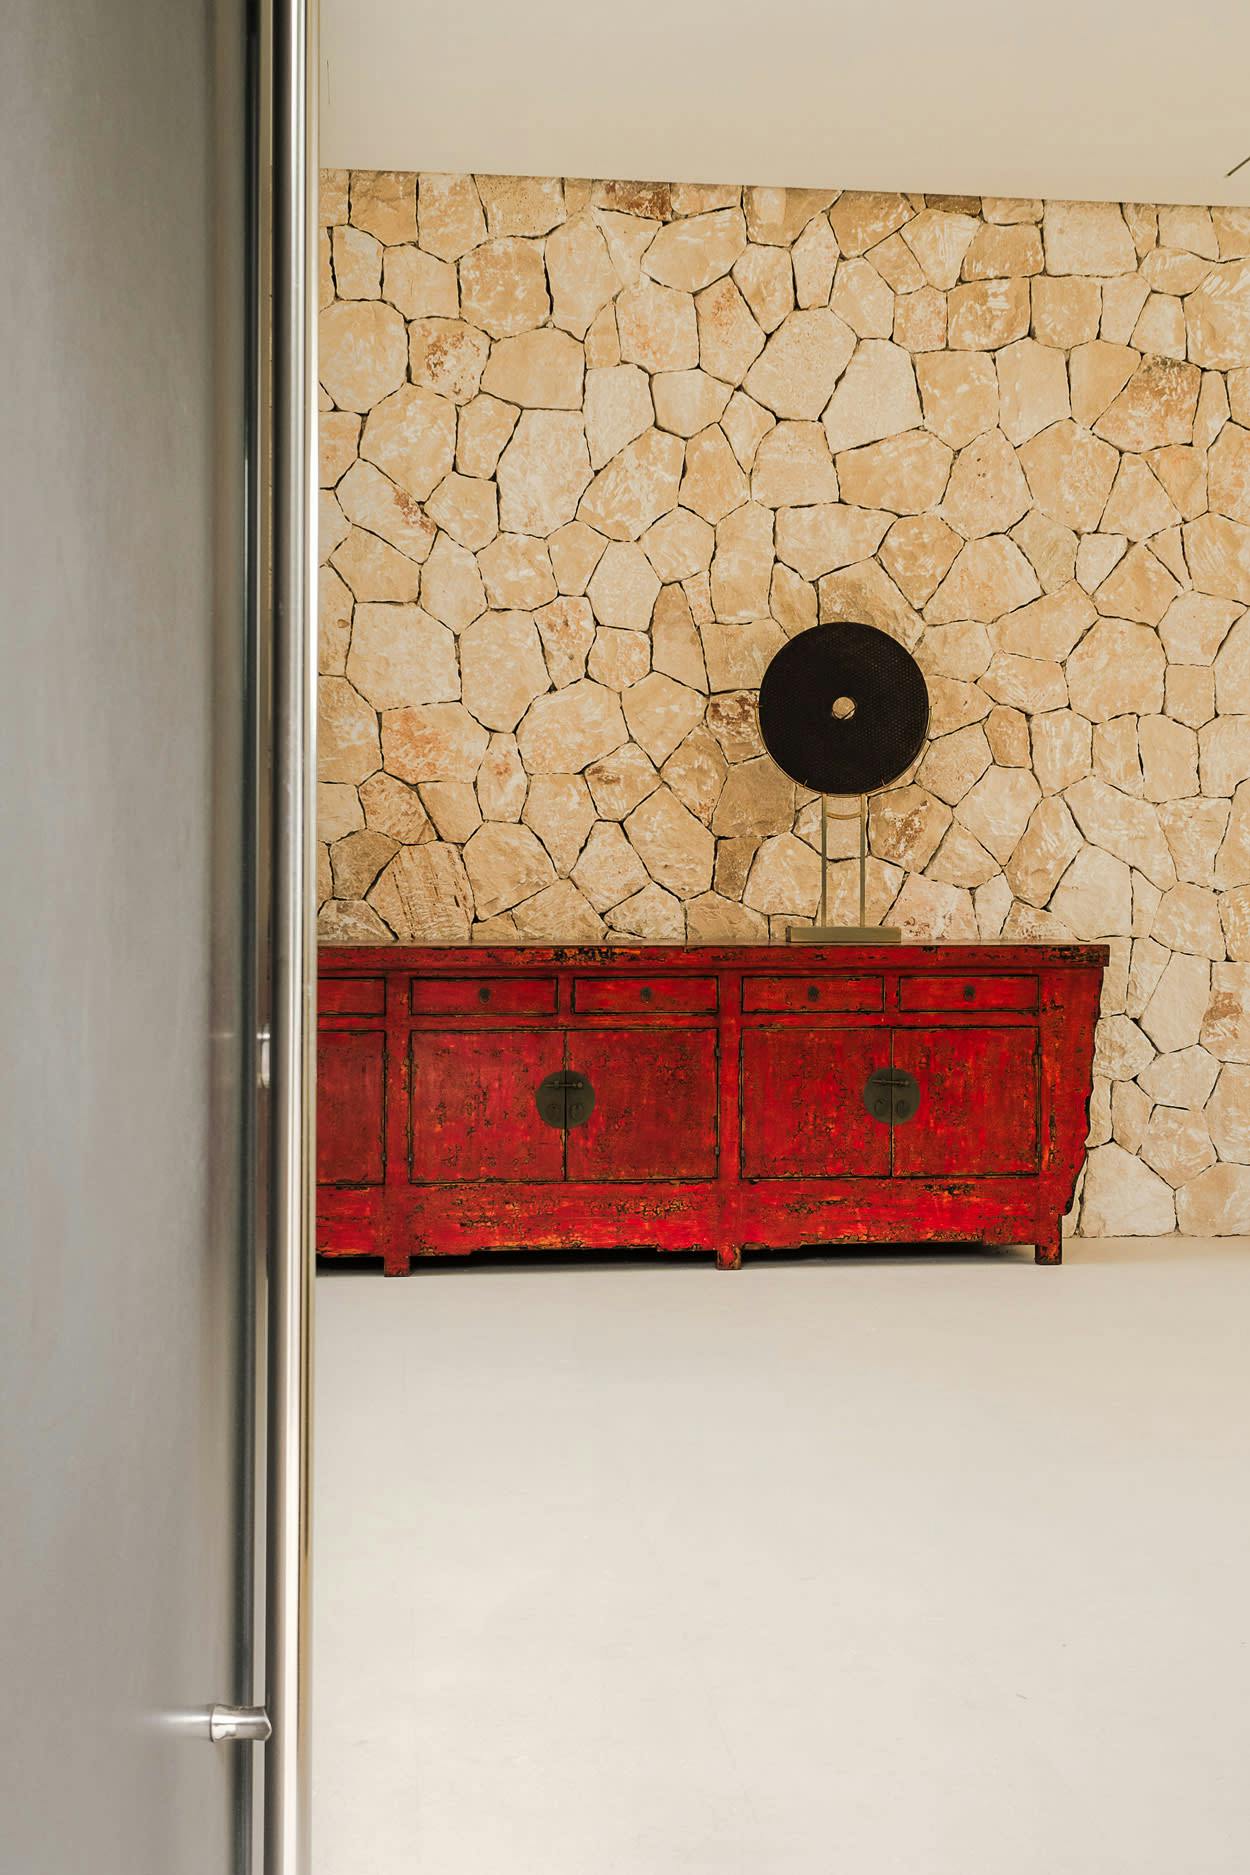 The image features a wooden dresser with a black and red color scheme, placed next to a wall with a stone wallpaper design.